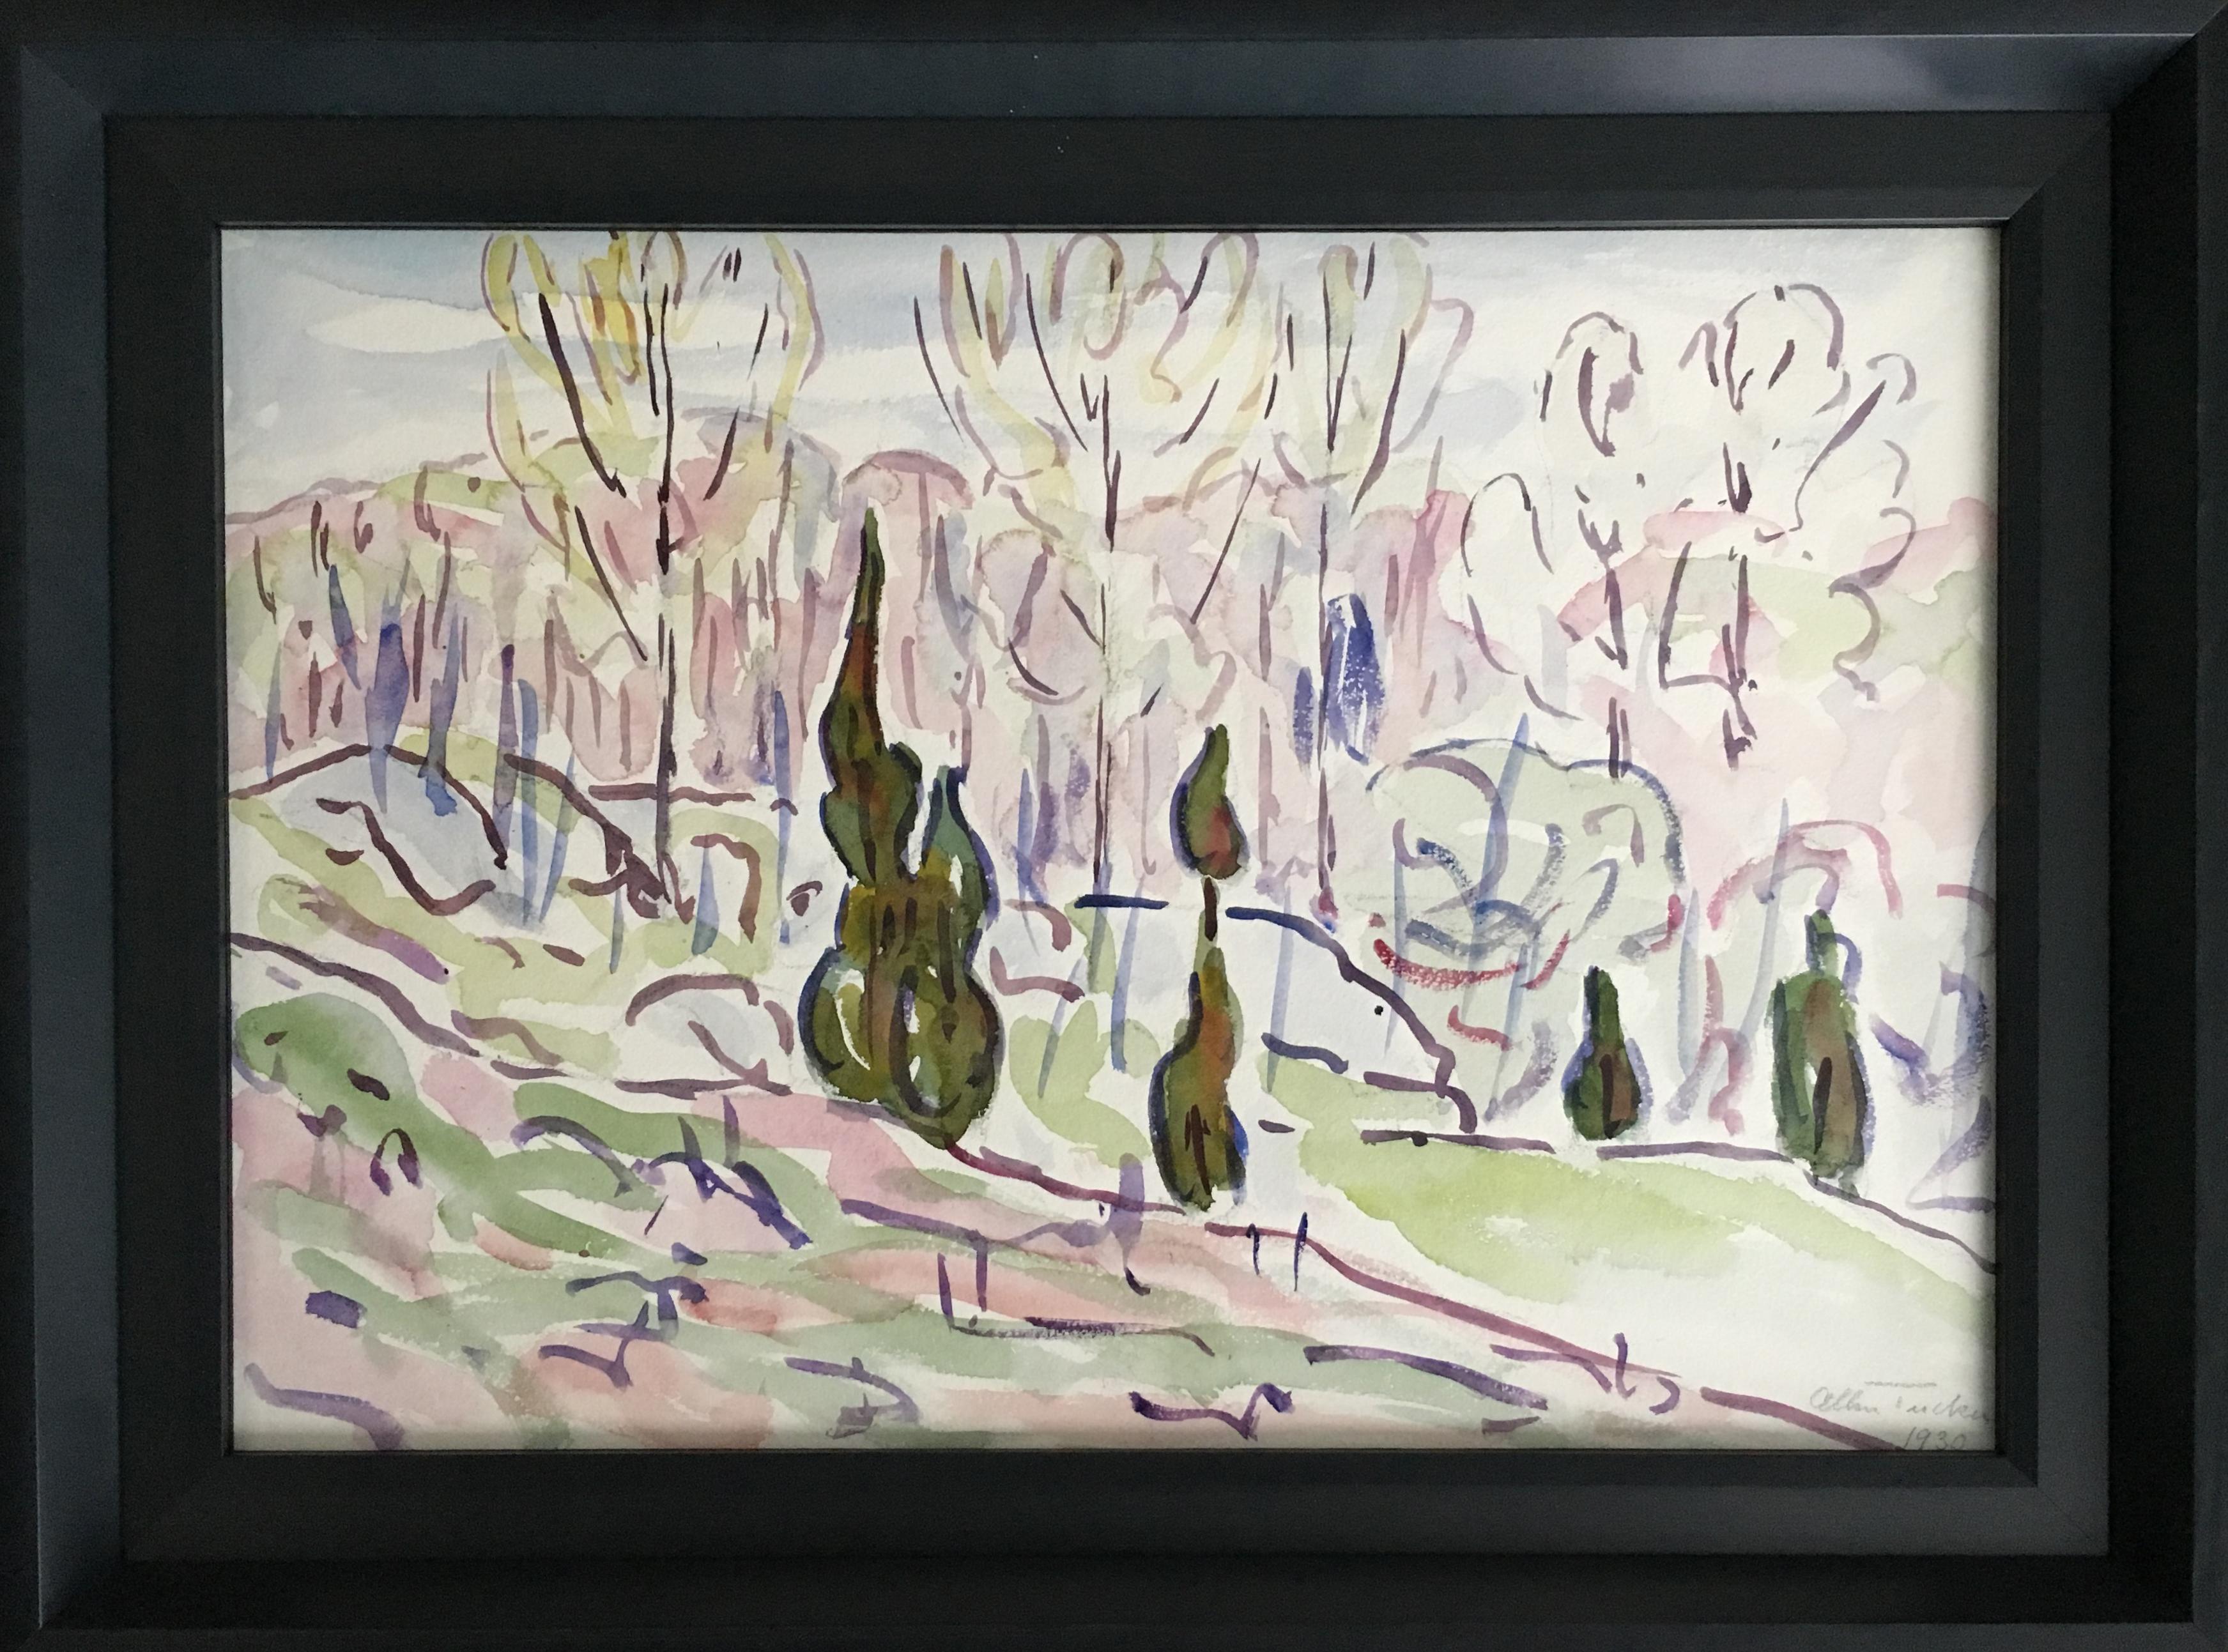 This 1930 watercolor by American artist and architect Allen Tucker is framed with museum quality, non-reflective glass and archival matting. It was gifted by the artist to his friend Una Brage (USA/Switzerland). 

Tucker, who was often called the